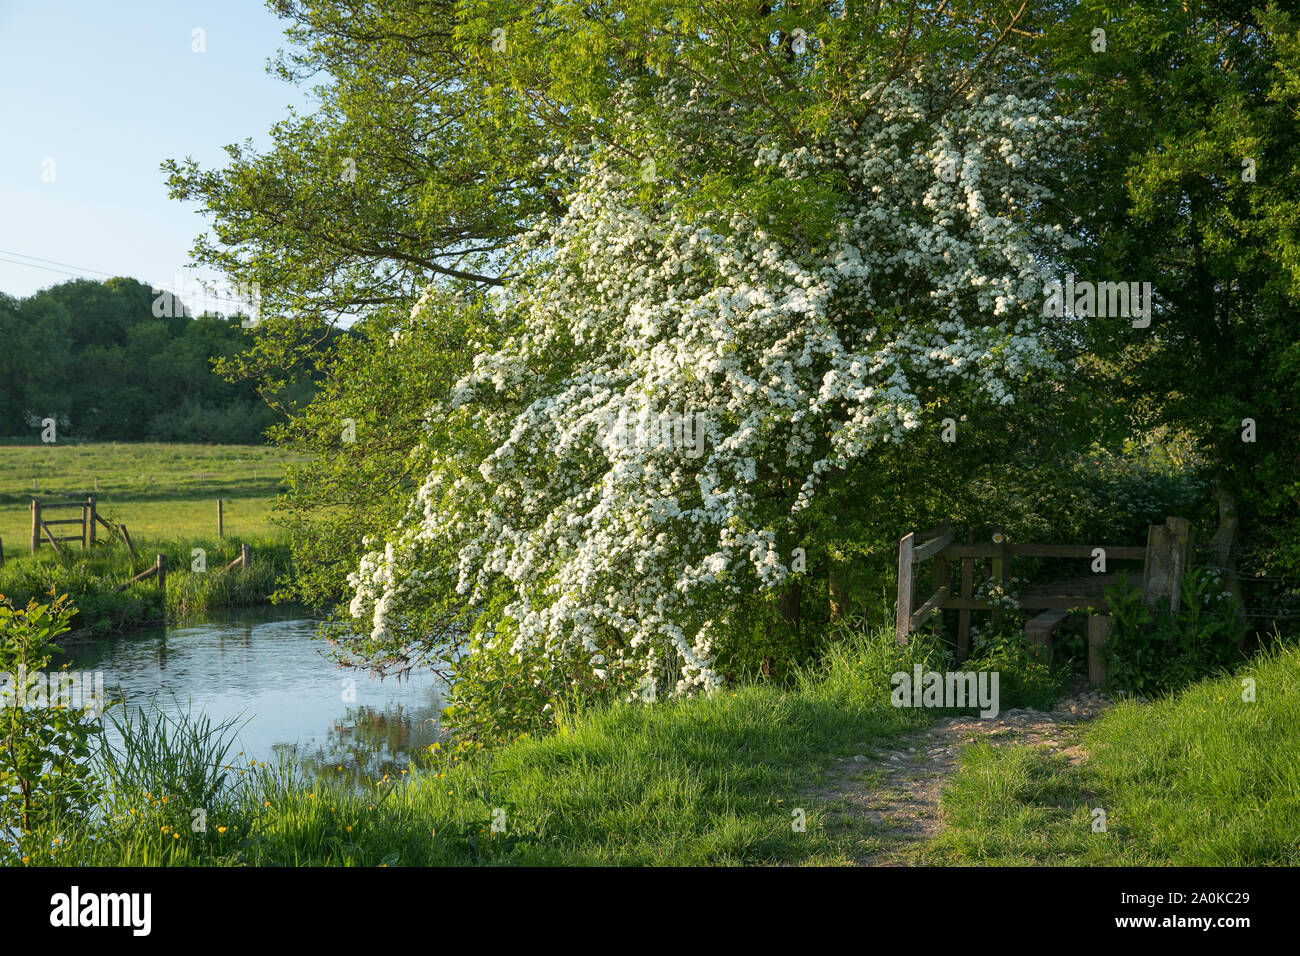 Common Hawthorn bush in blossom and public footpath track by The River Windrush in Spring / Summer at Burford in the Cotswolds, UK Stock Photo